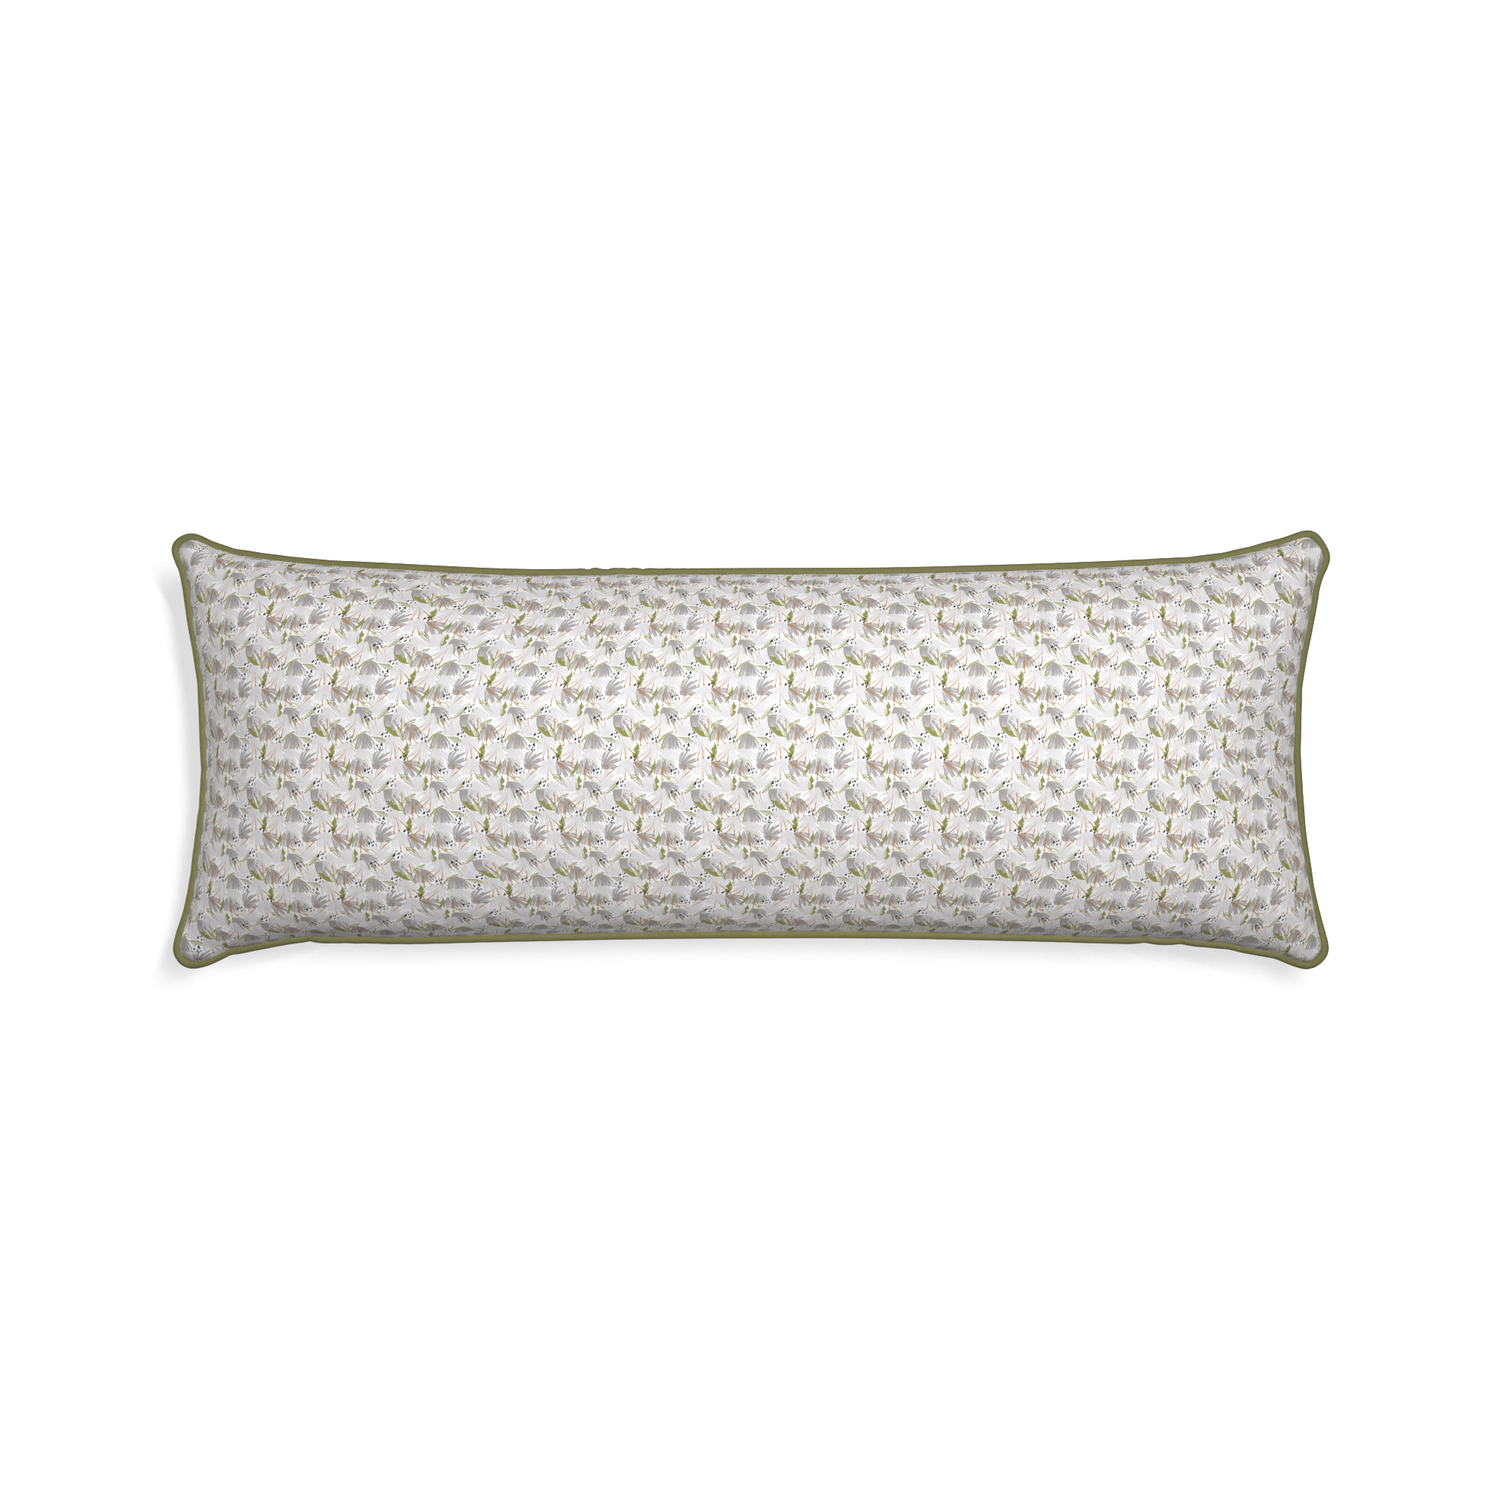 Xl-lumbar eden grey custom pillow with moss piping on white background